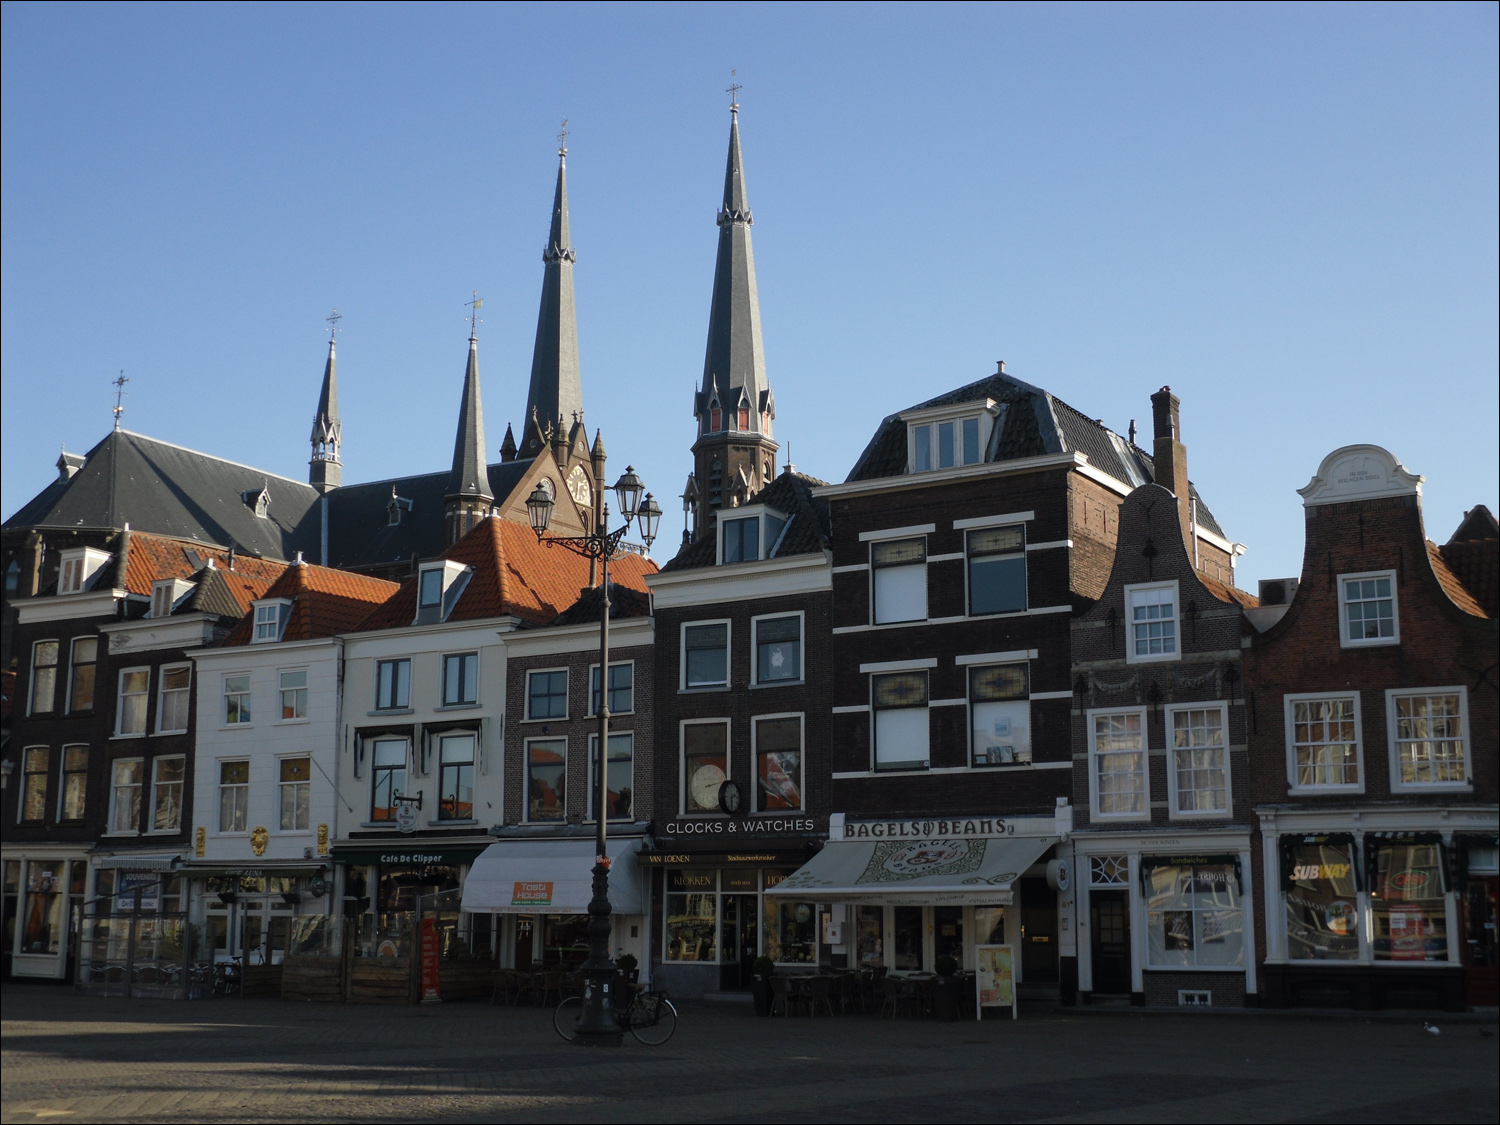 View of buildings along the city square in Delft